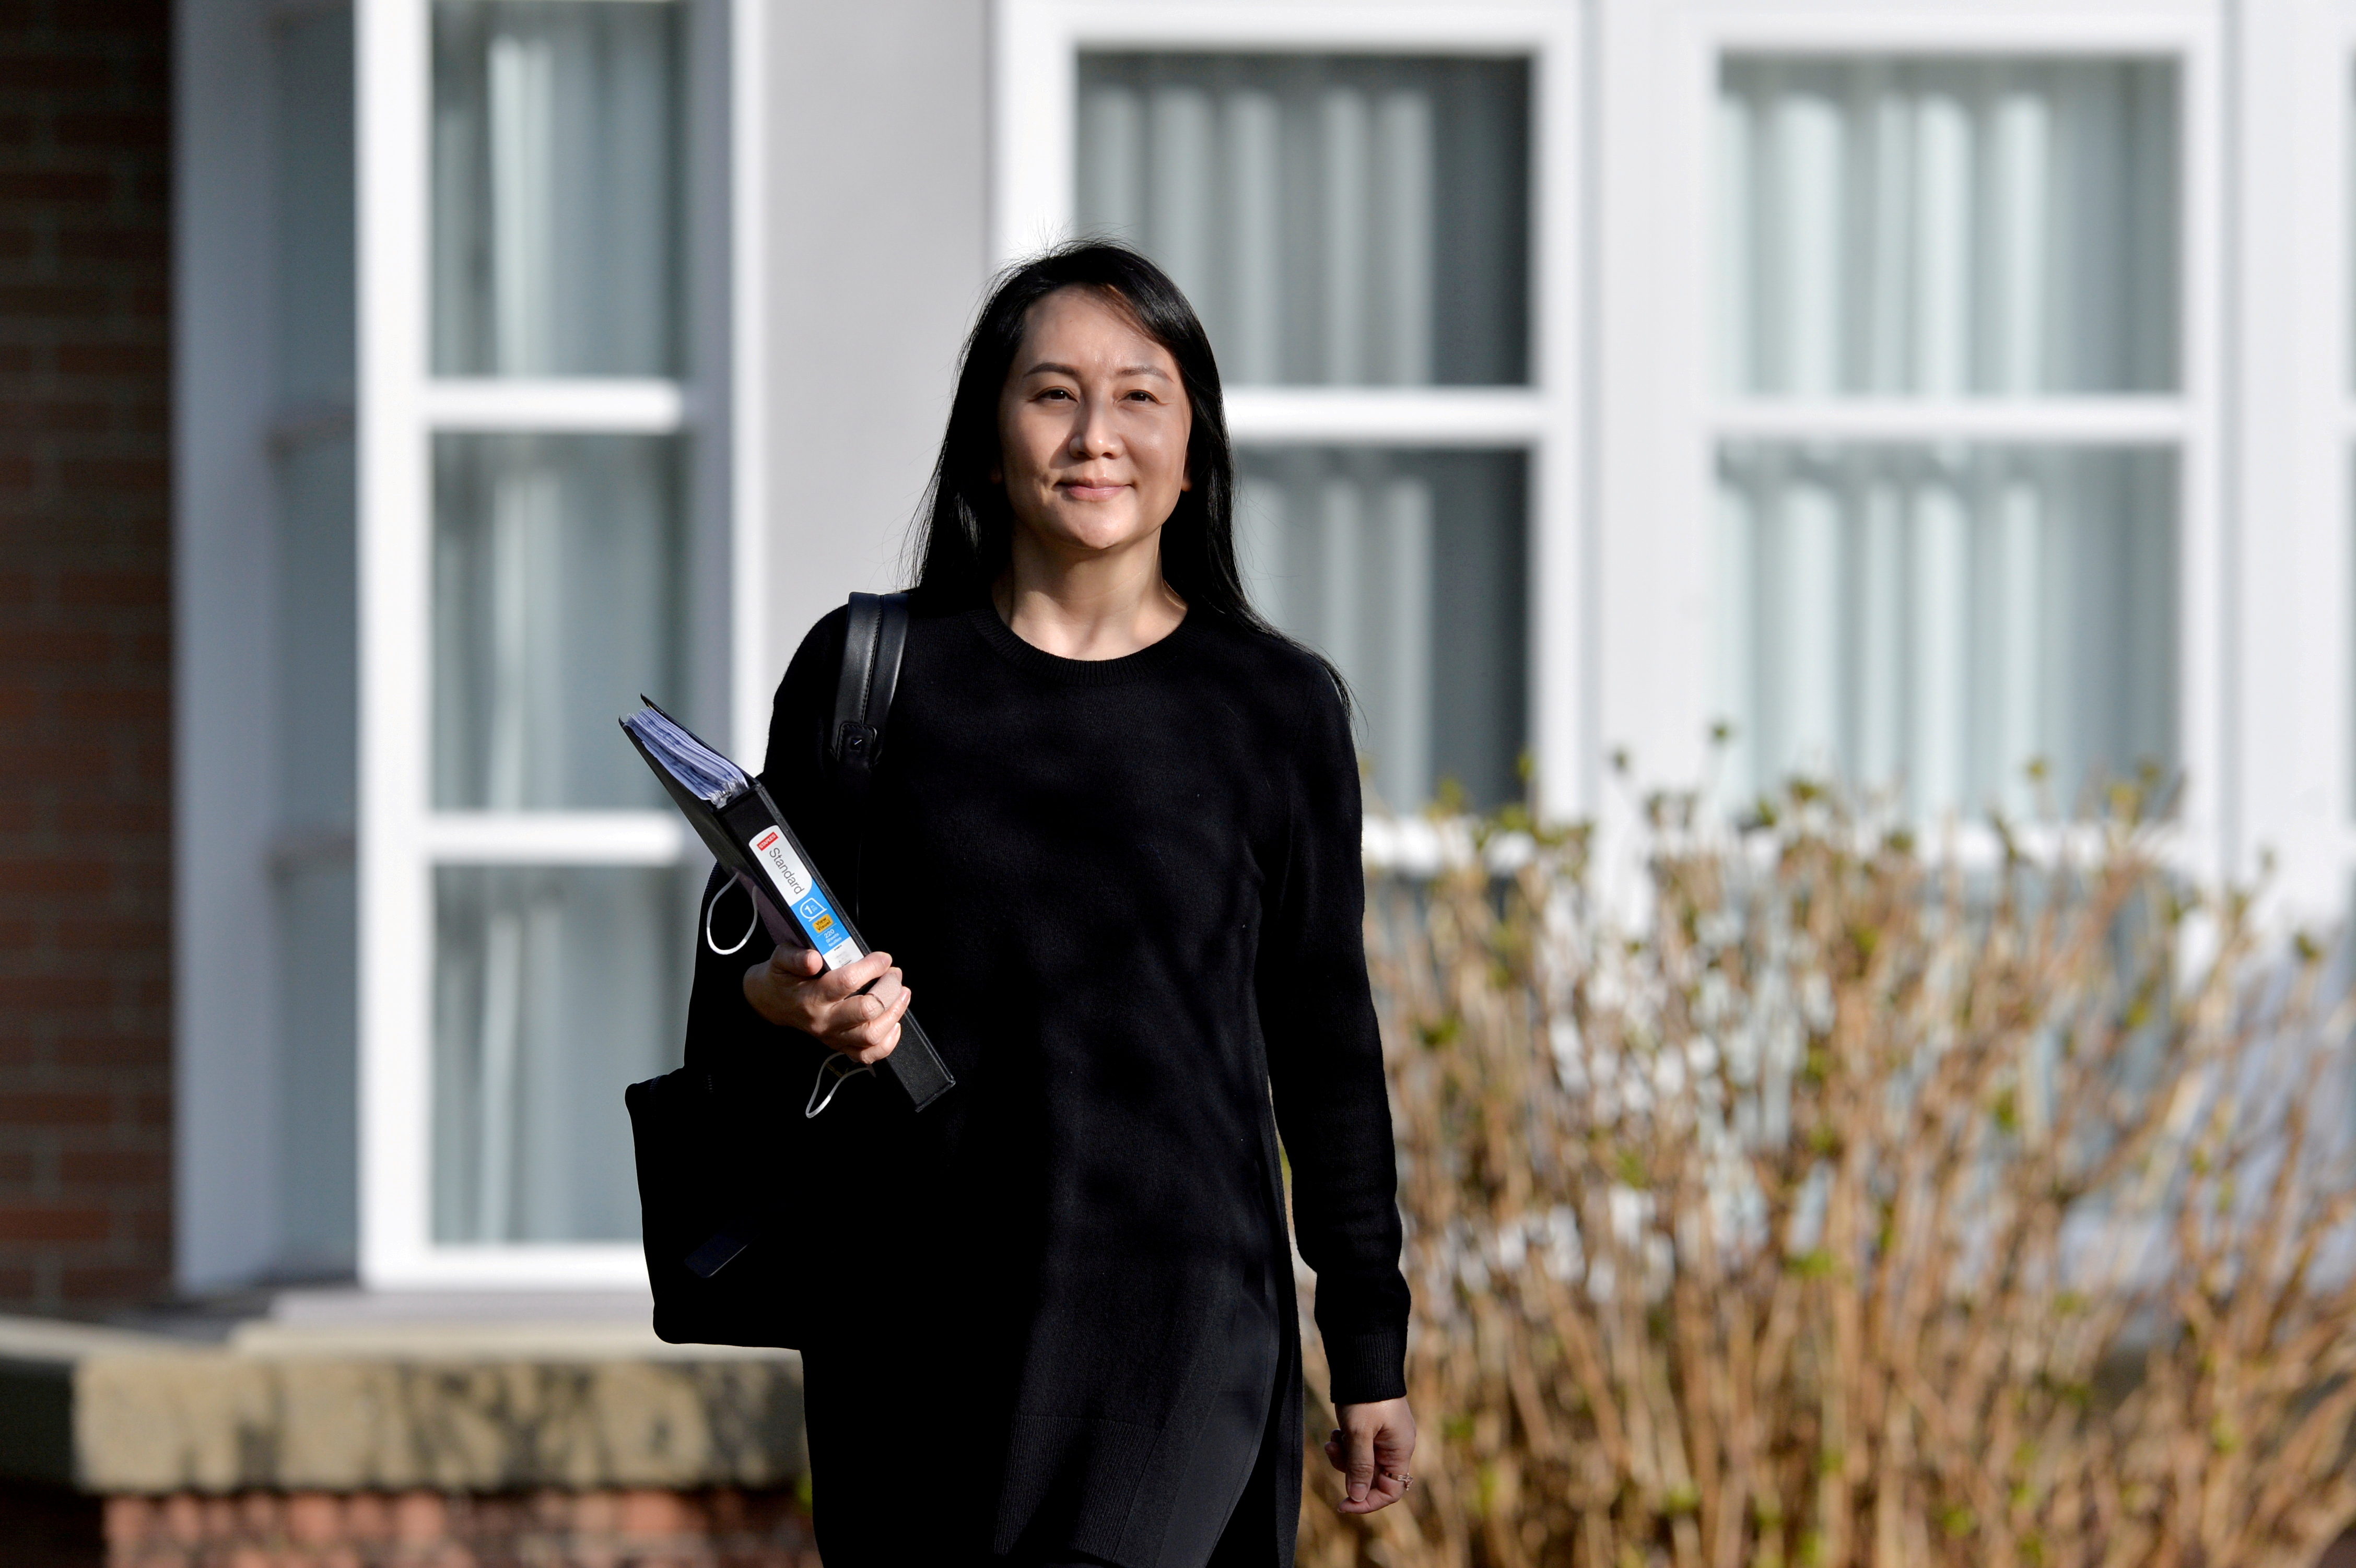 Huawei Technologies Chief Financial Officer Meng Wanzhou leaves her home to attend a court hearing in Vancouver, British Columbia, Canada March 22, 2021. REUTERS/Jennifer Gauthier/File Photo